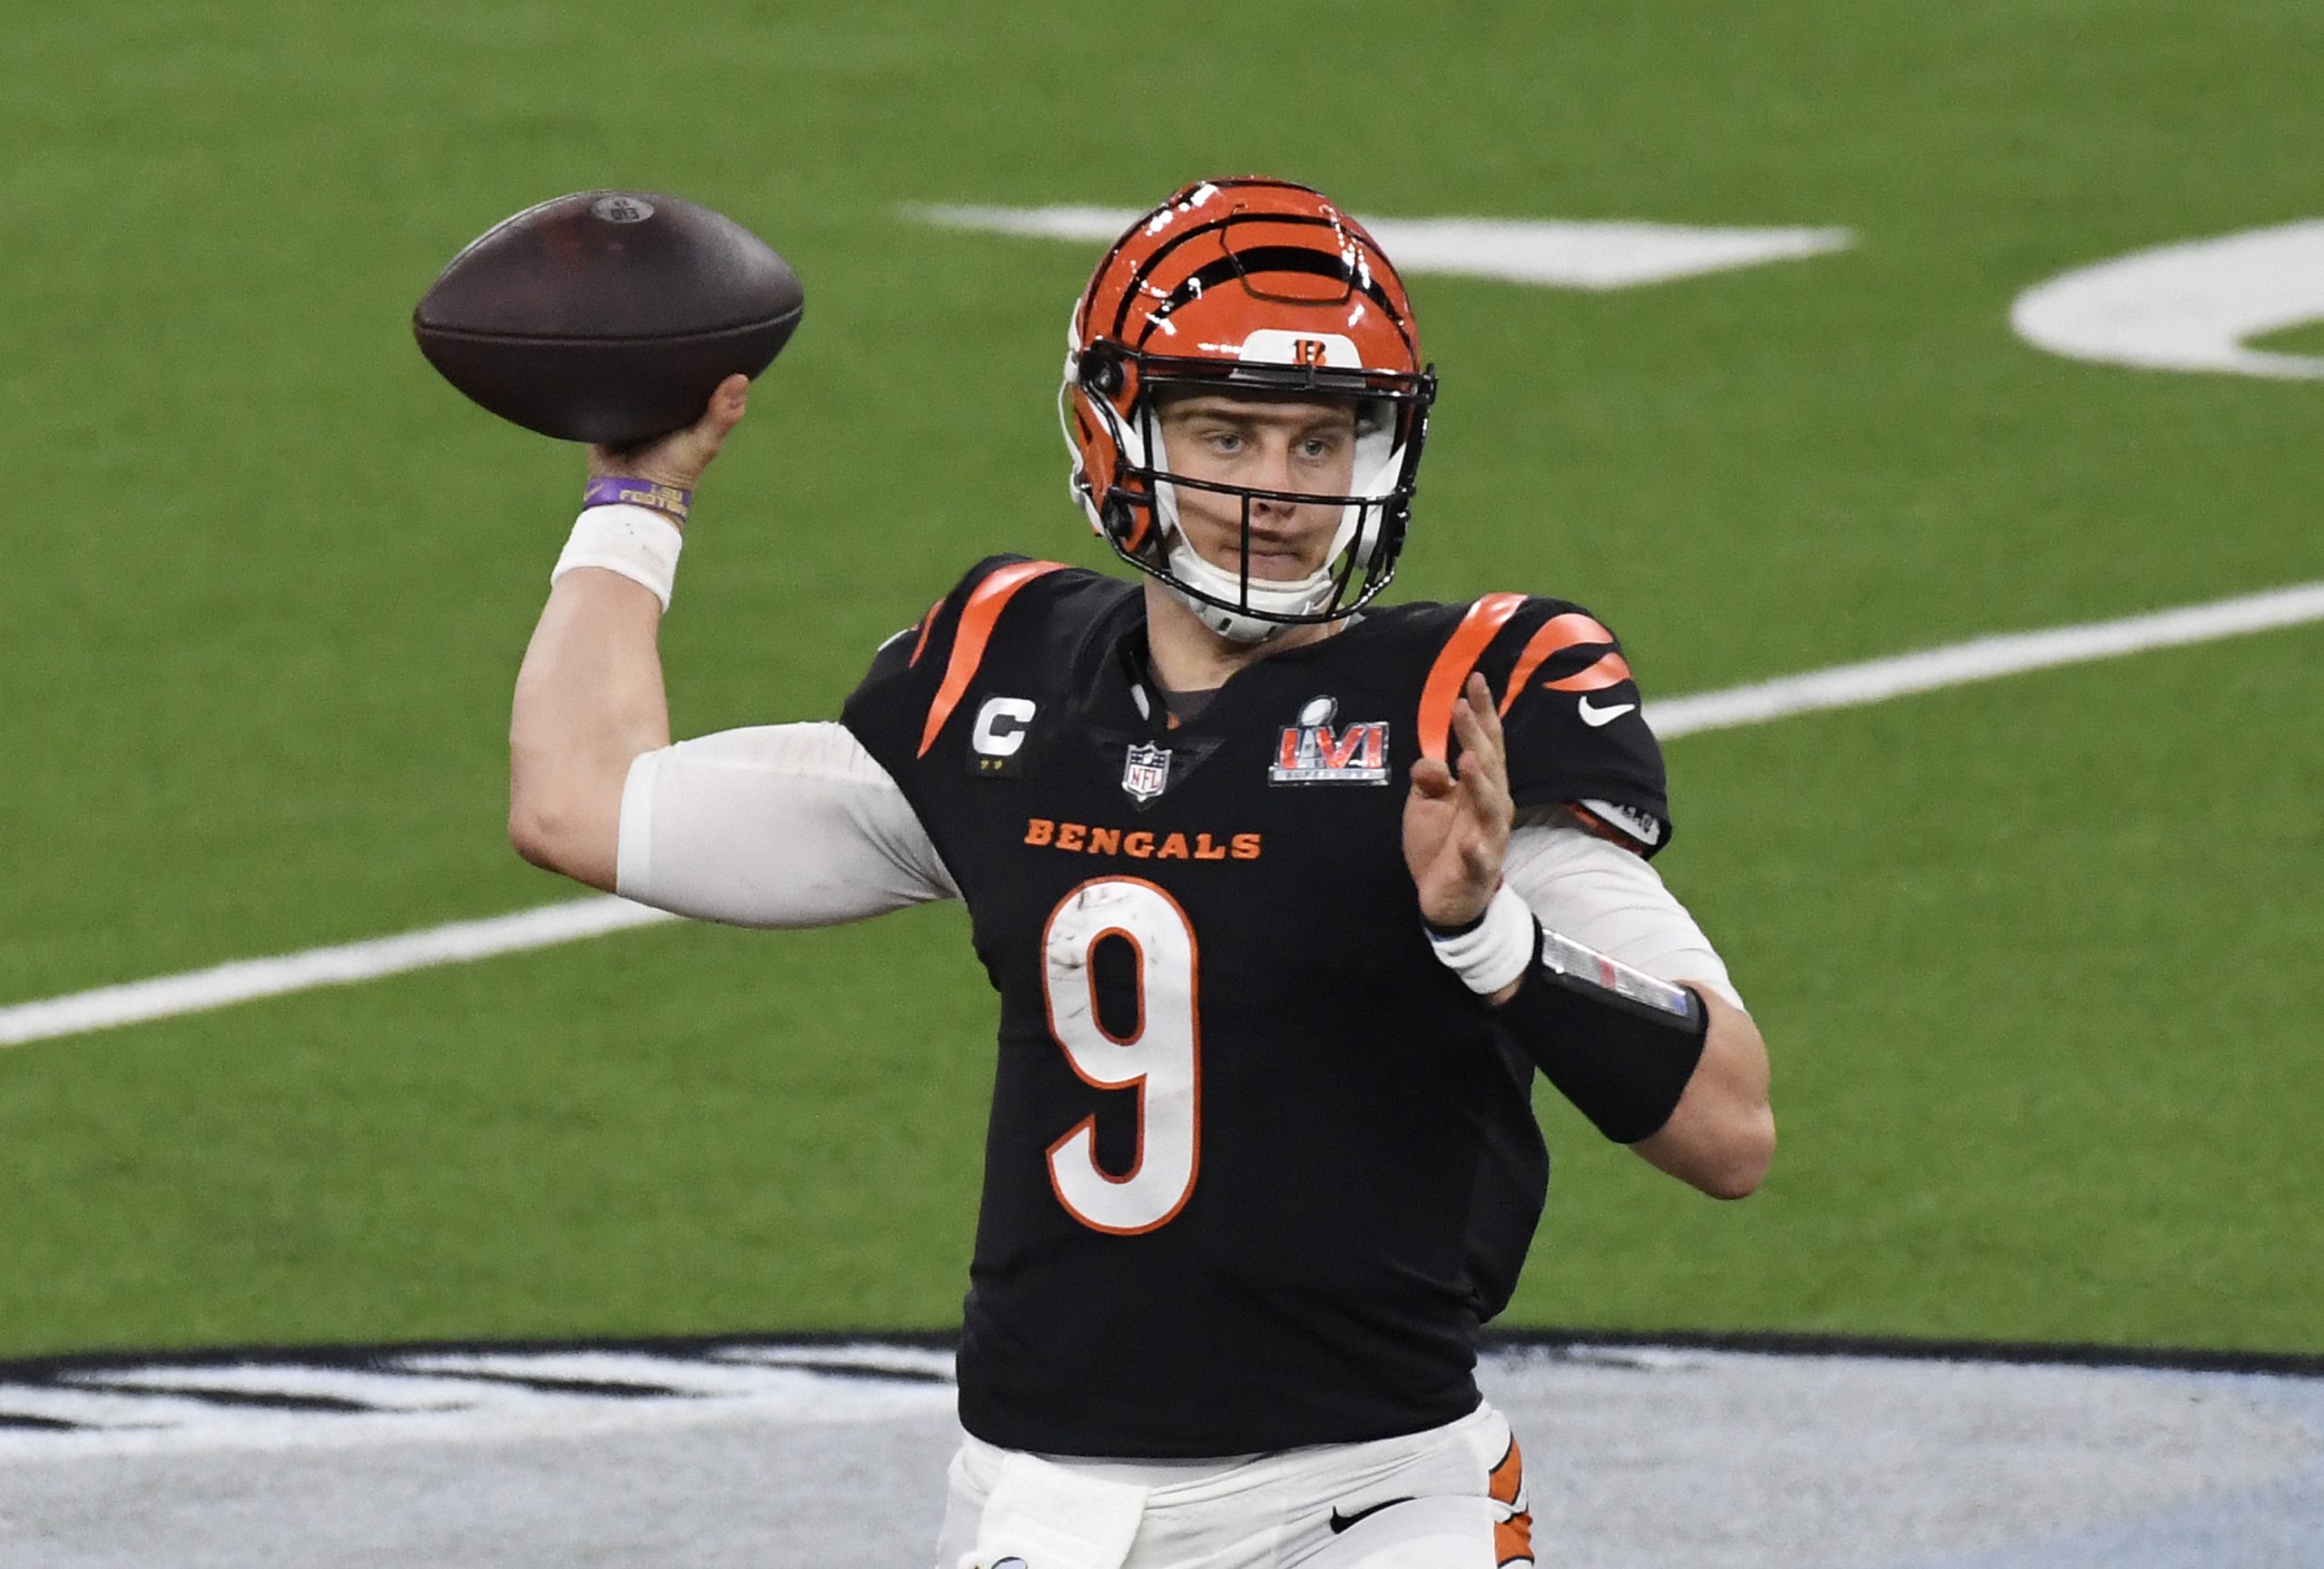 Joe Burrow of the Cincinnati Bengals looks to pass against the Los Angeles Rams during Super Bowl 56.